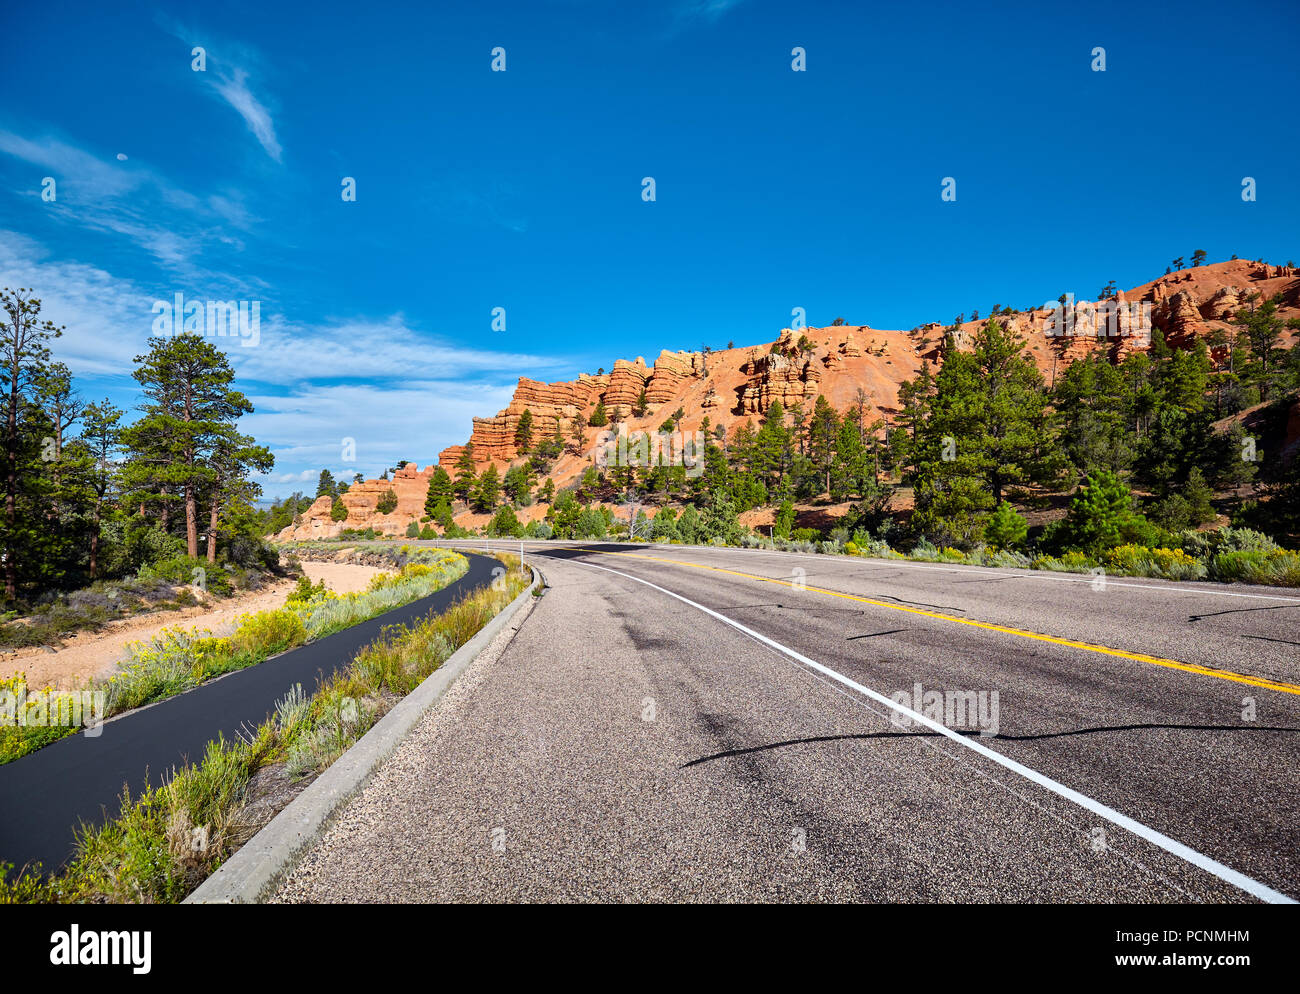 Scenic road in Bryce Canyon National Park, Utah, USA. Stock Photo